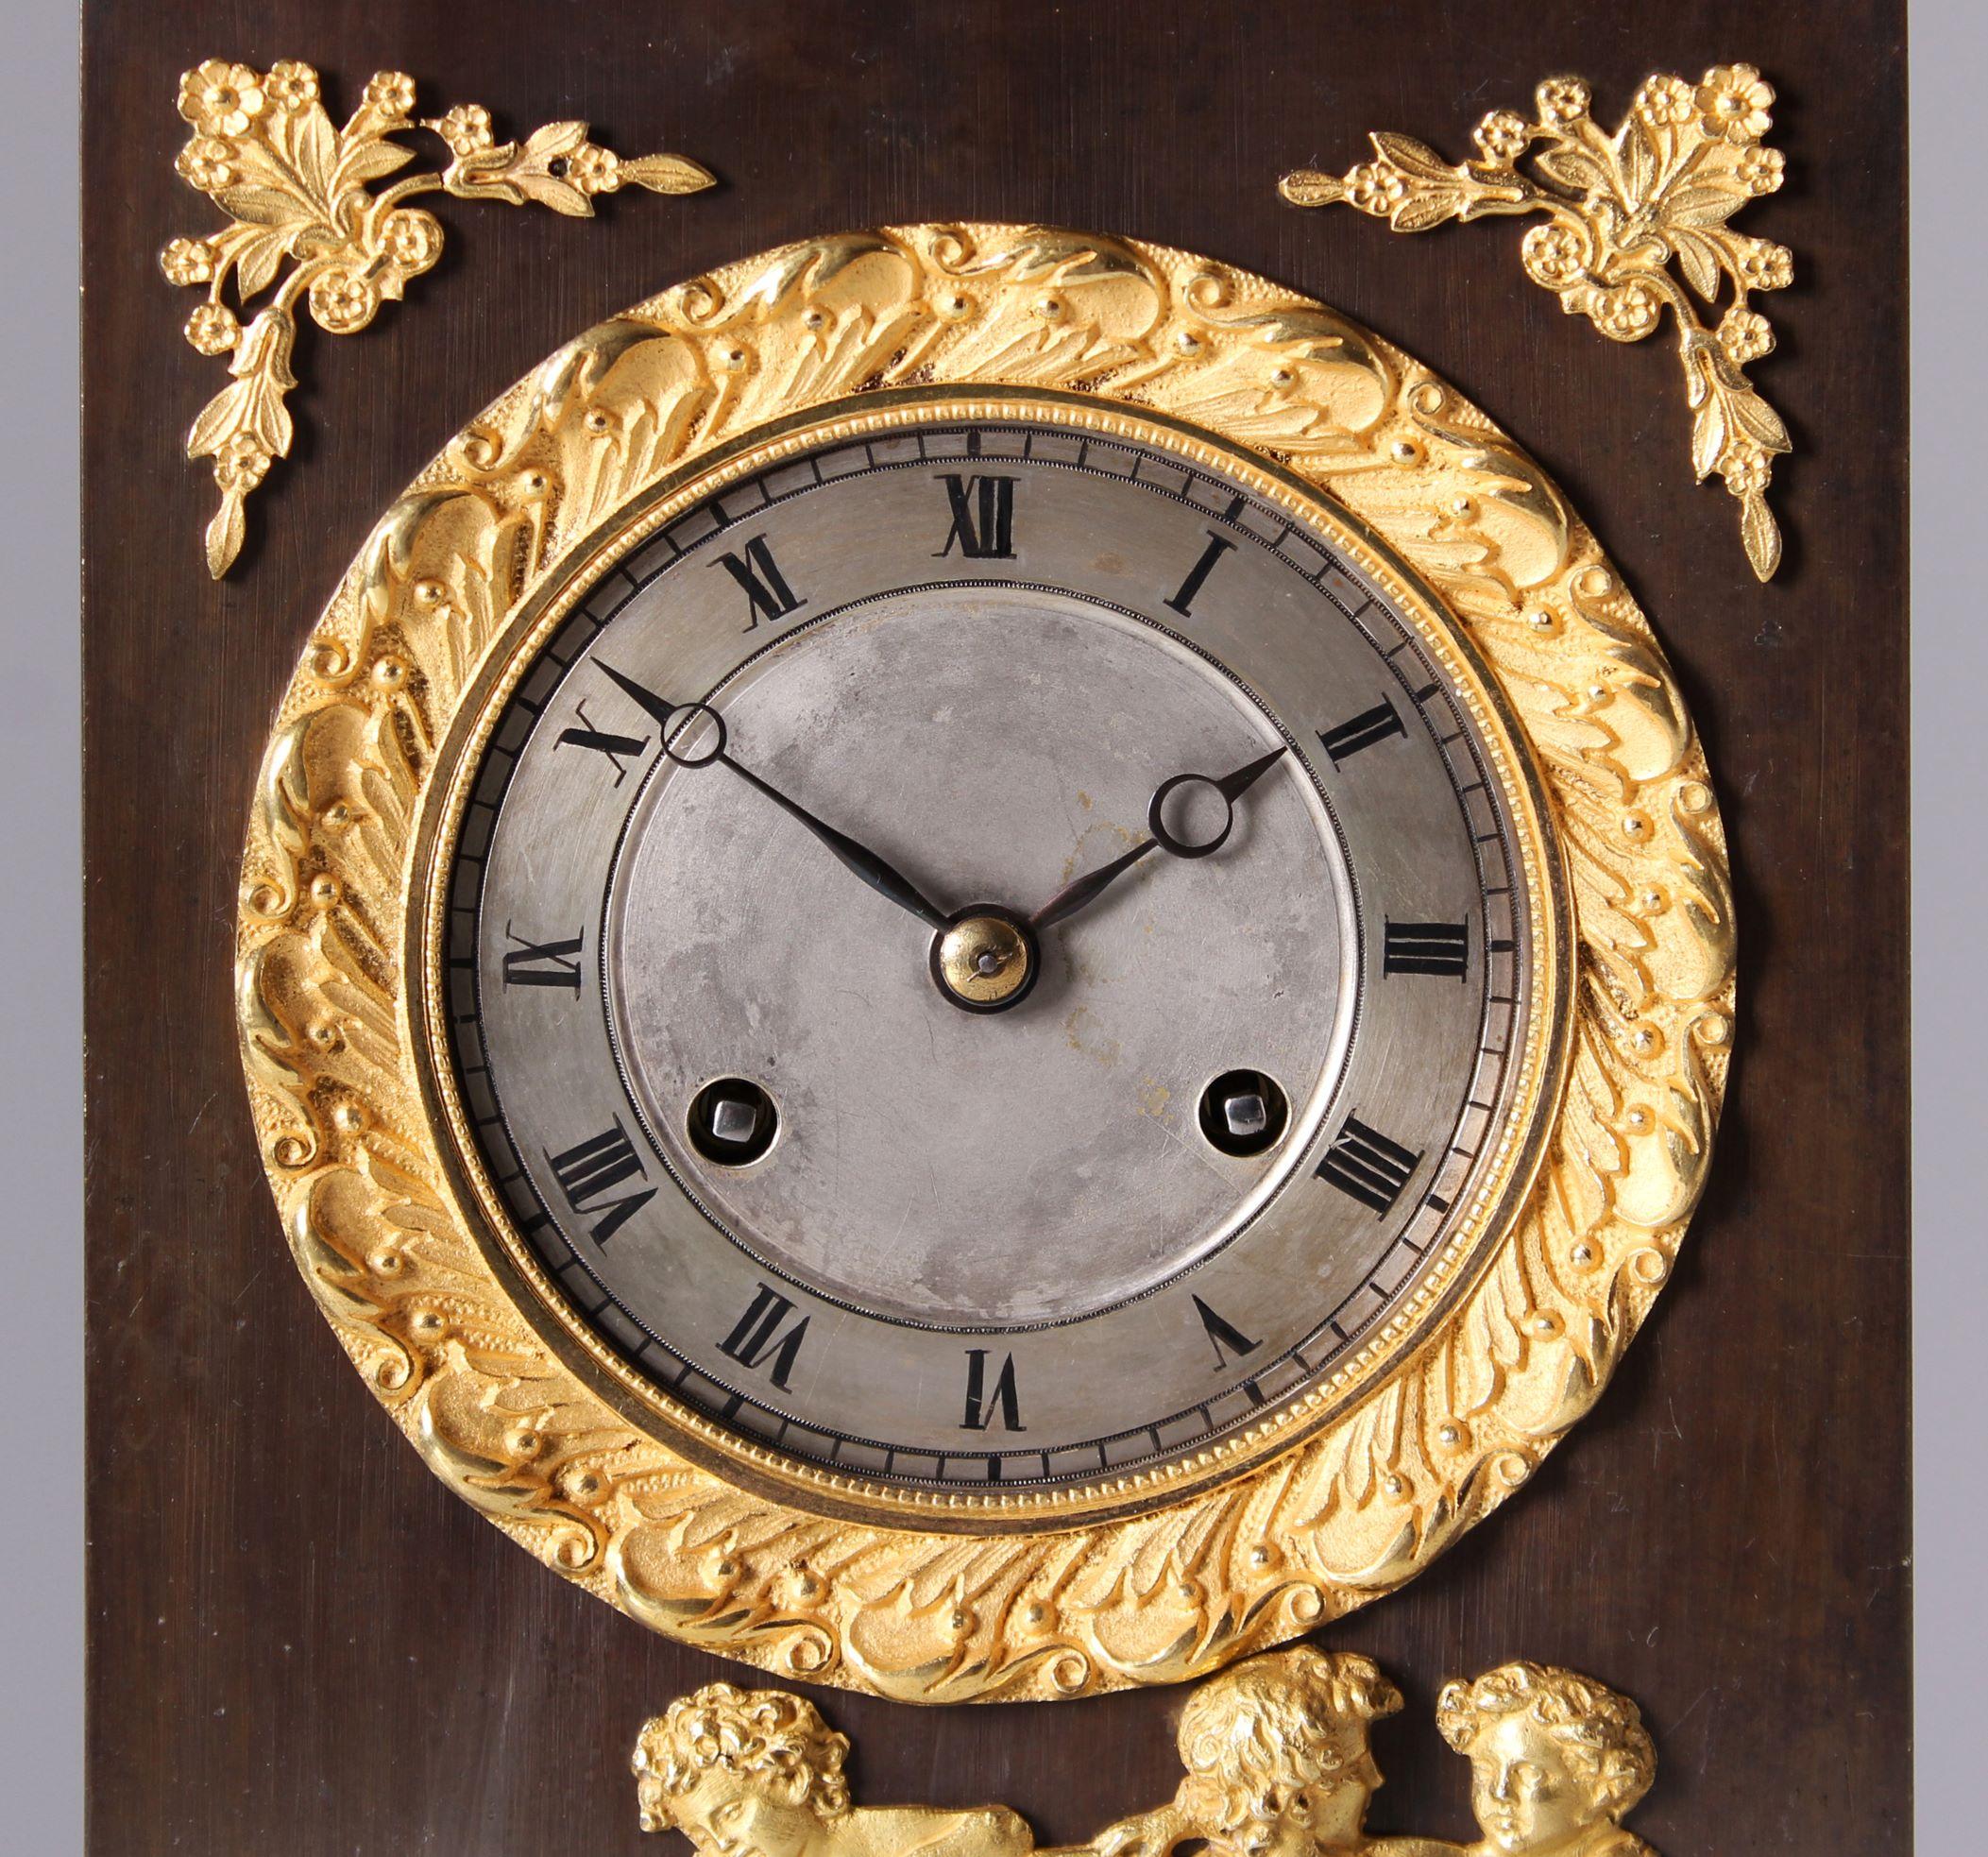 Antique mantel clock on the theme of astronomy

France
Bronze
Charles X around 1830

Dimensions: H x W x D: 48 x 19 x 10 cm

Description:
Unusual and beautifully crafted bronze mantel clock dedicated entirely to the theme of astronomy.

Dark